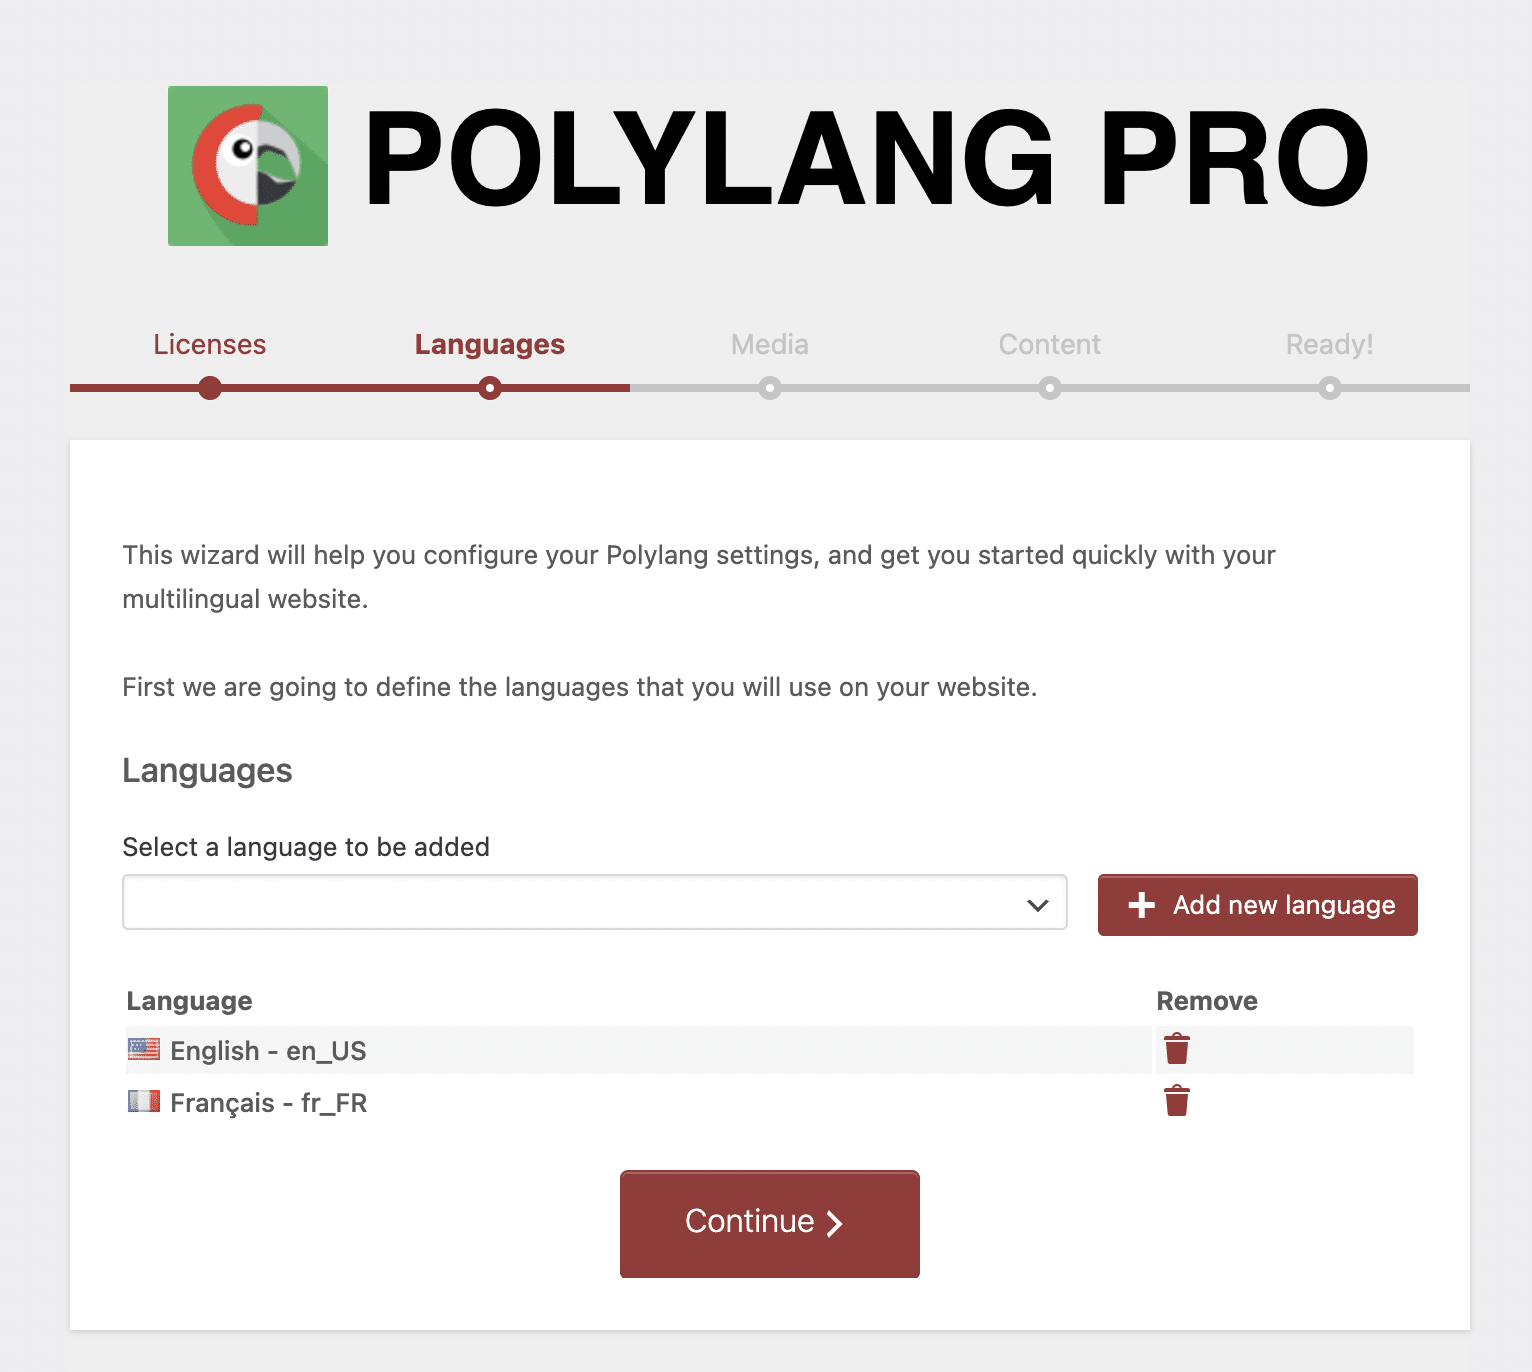 Select a language to be added on Polylang Pro.